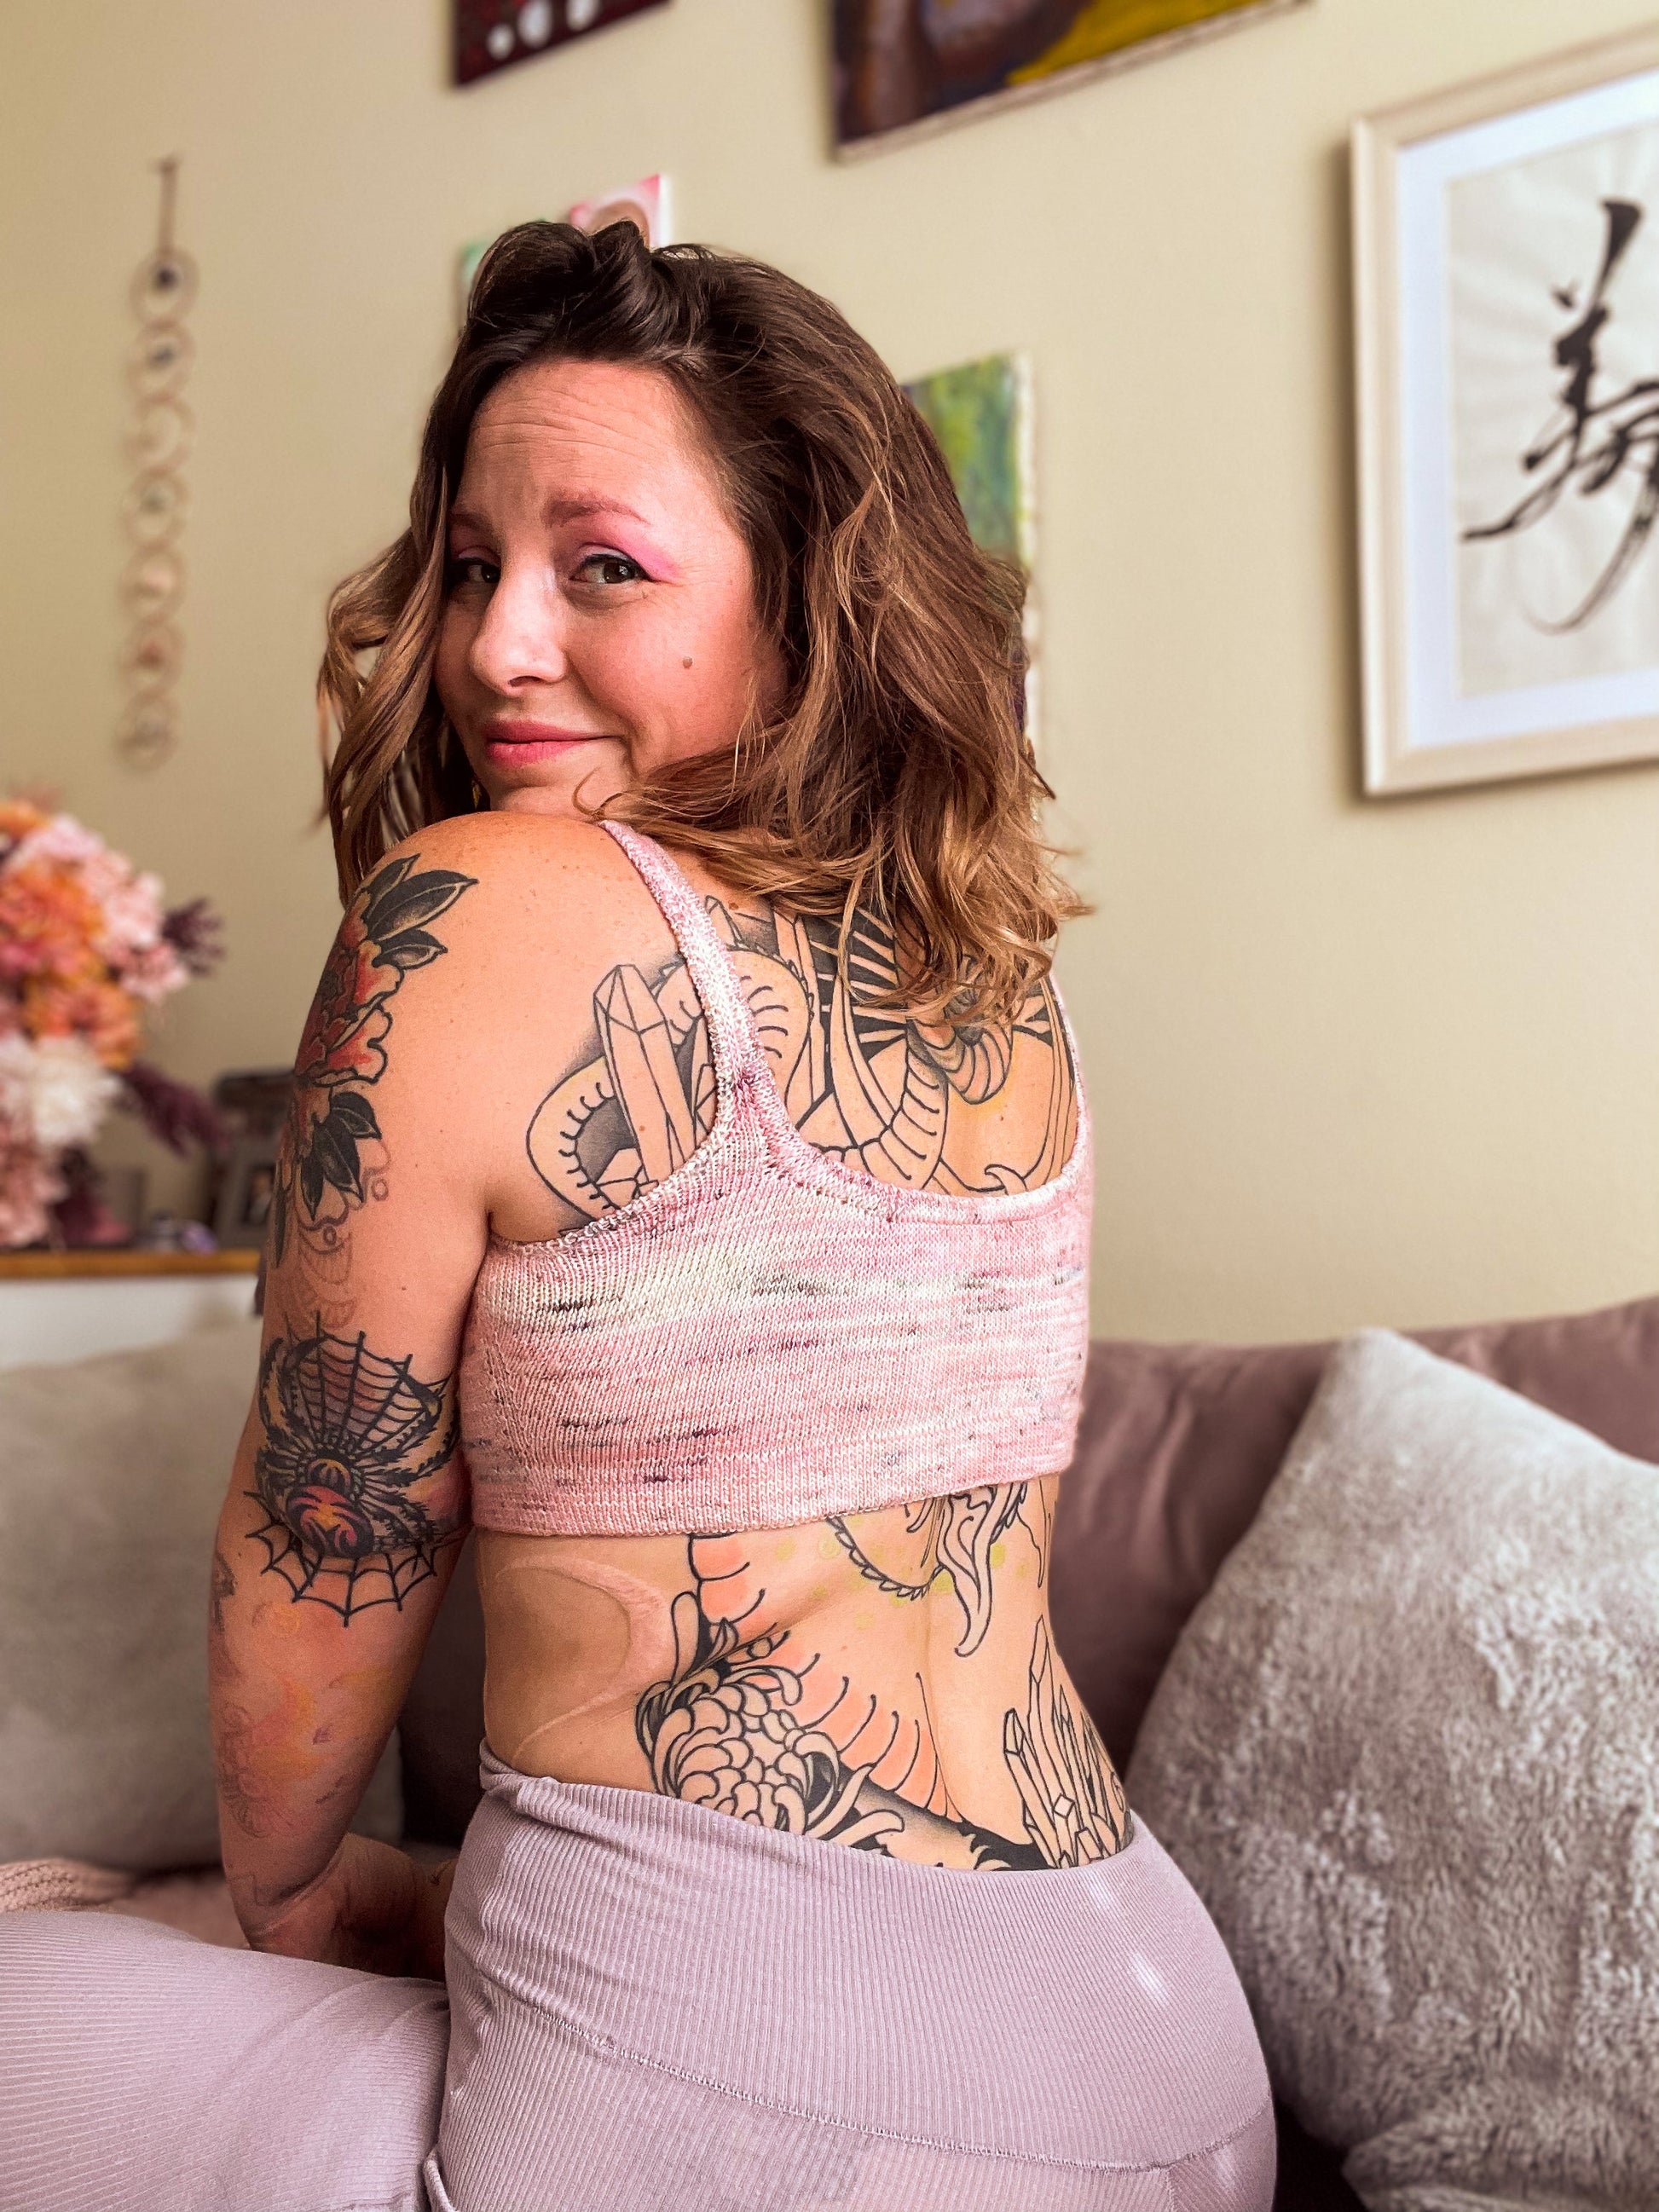 Seen from behind at an angle, Bess wears a hand knit, light pink speckled bralette with matching leggings. She turns her head to smile at the camera.